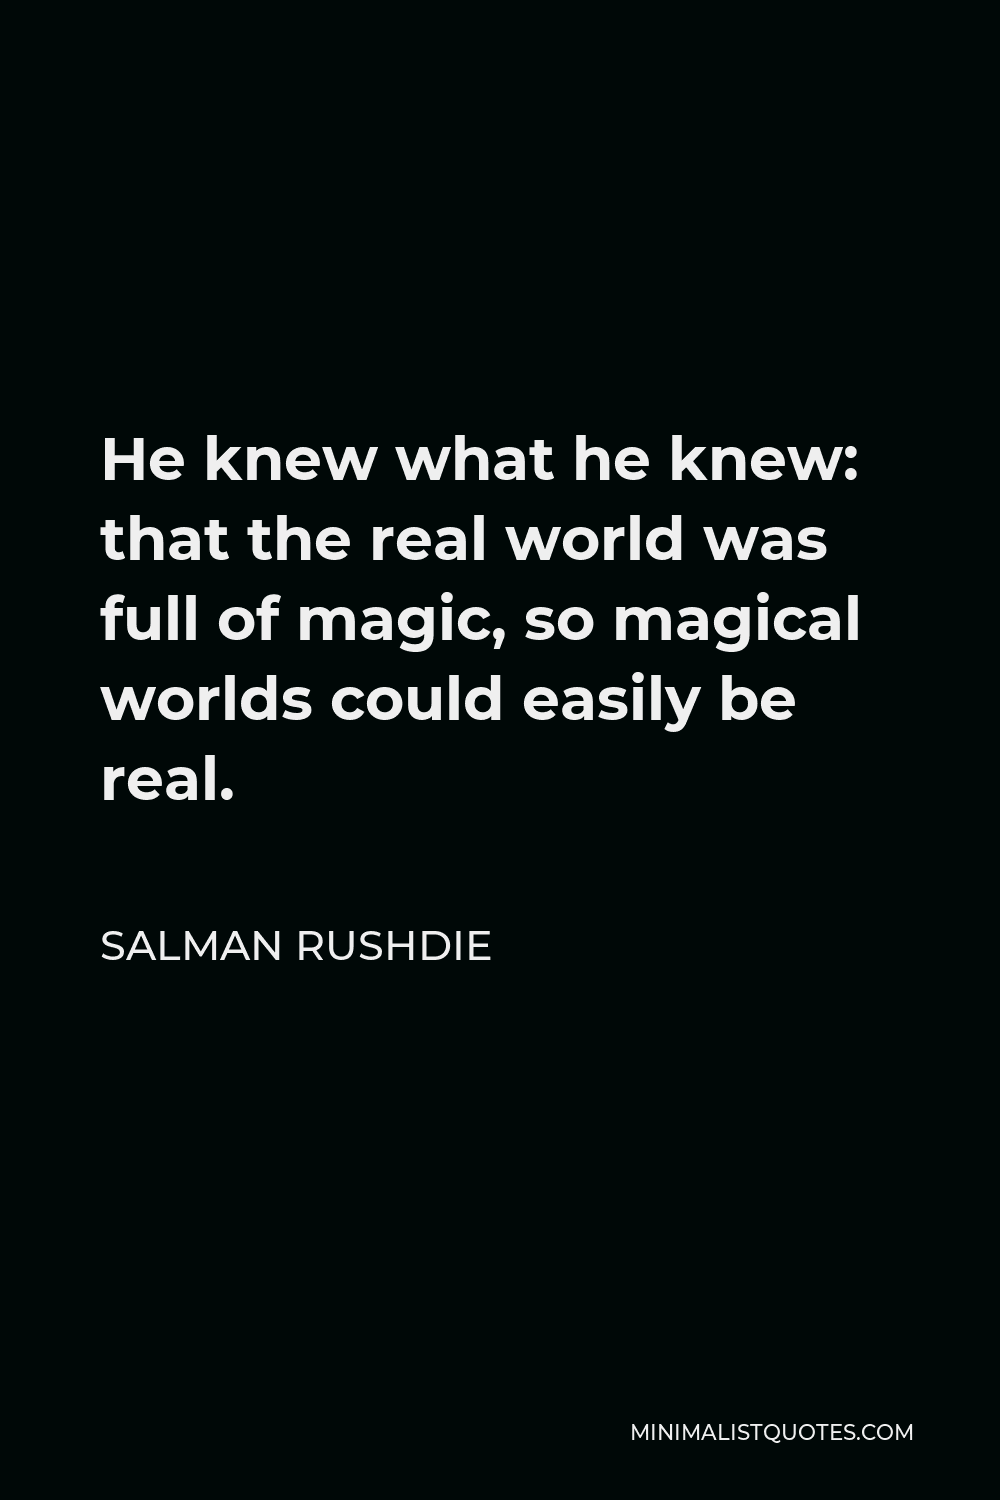 Salman Rushdie Quote - He knew what he knew: that the real world was full of magic, so magical worlds could easily be real.